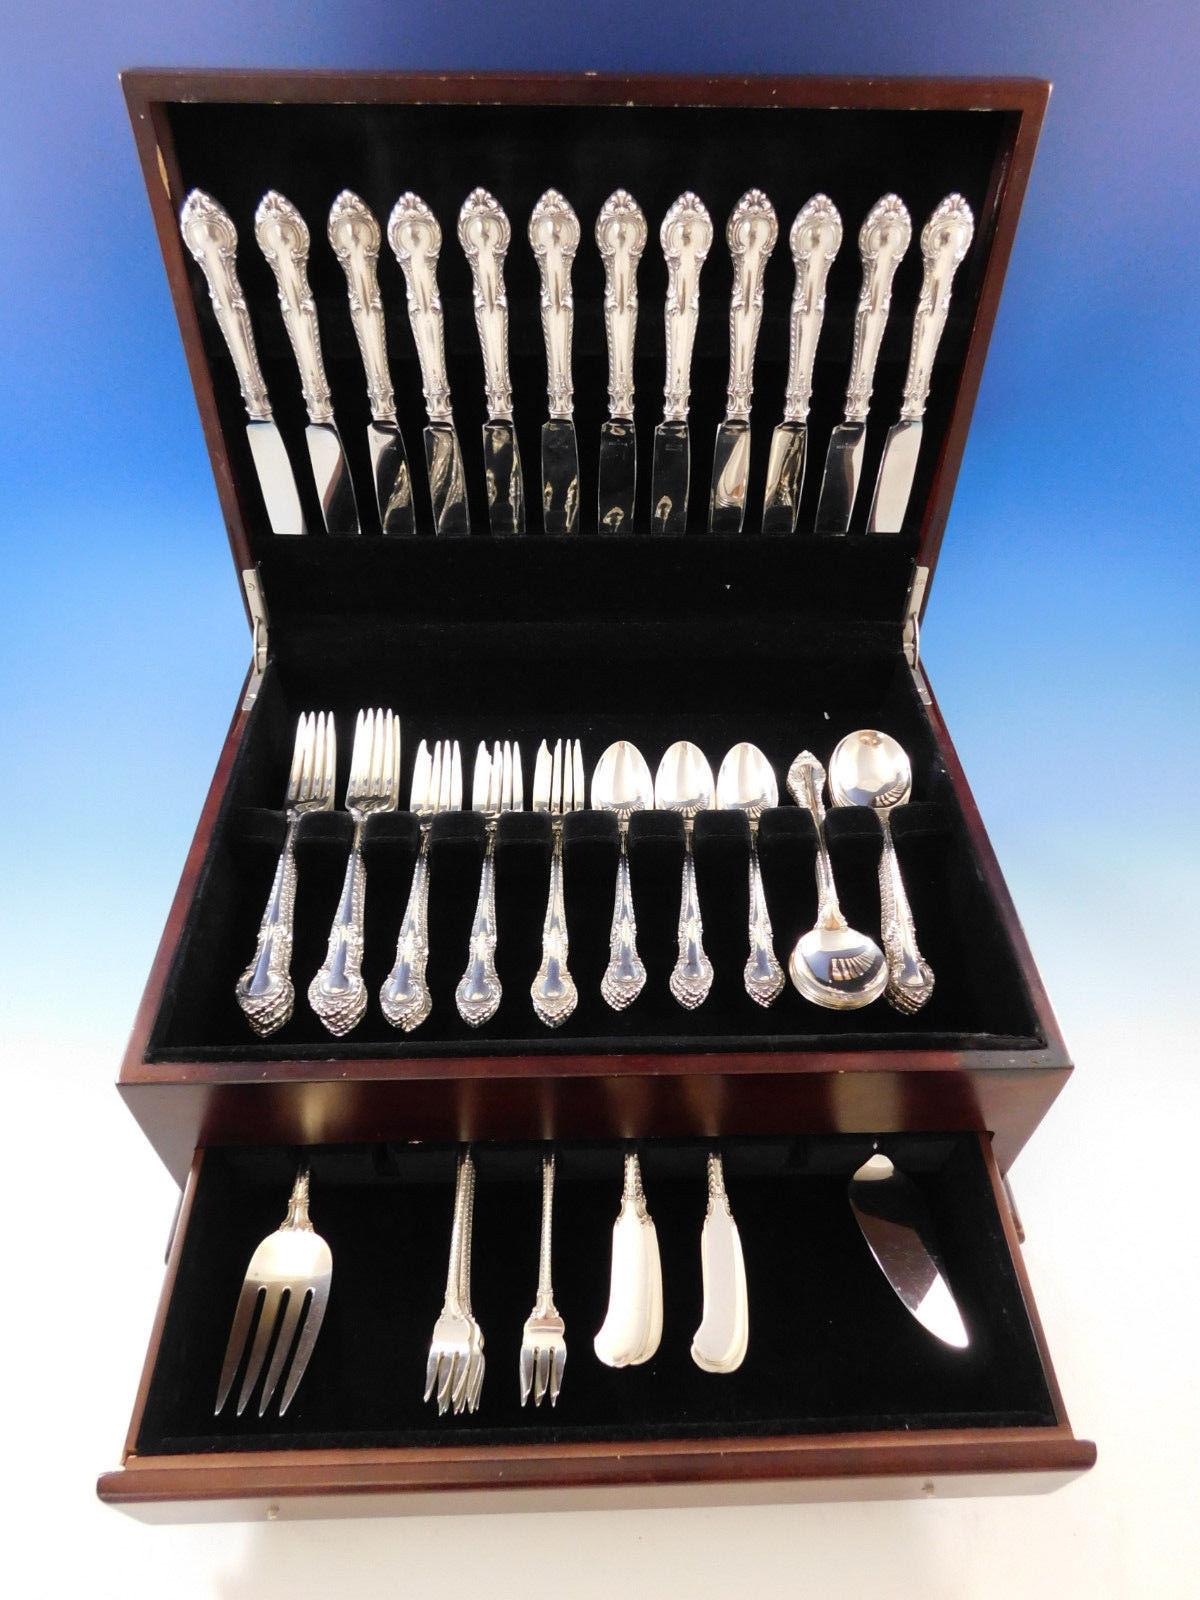 Superb English Gadroon by Gorham sterling silver flatware set - 86 pieces. This set includes:

12 knives, 8 7/8